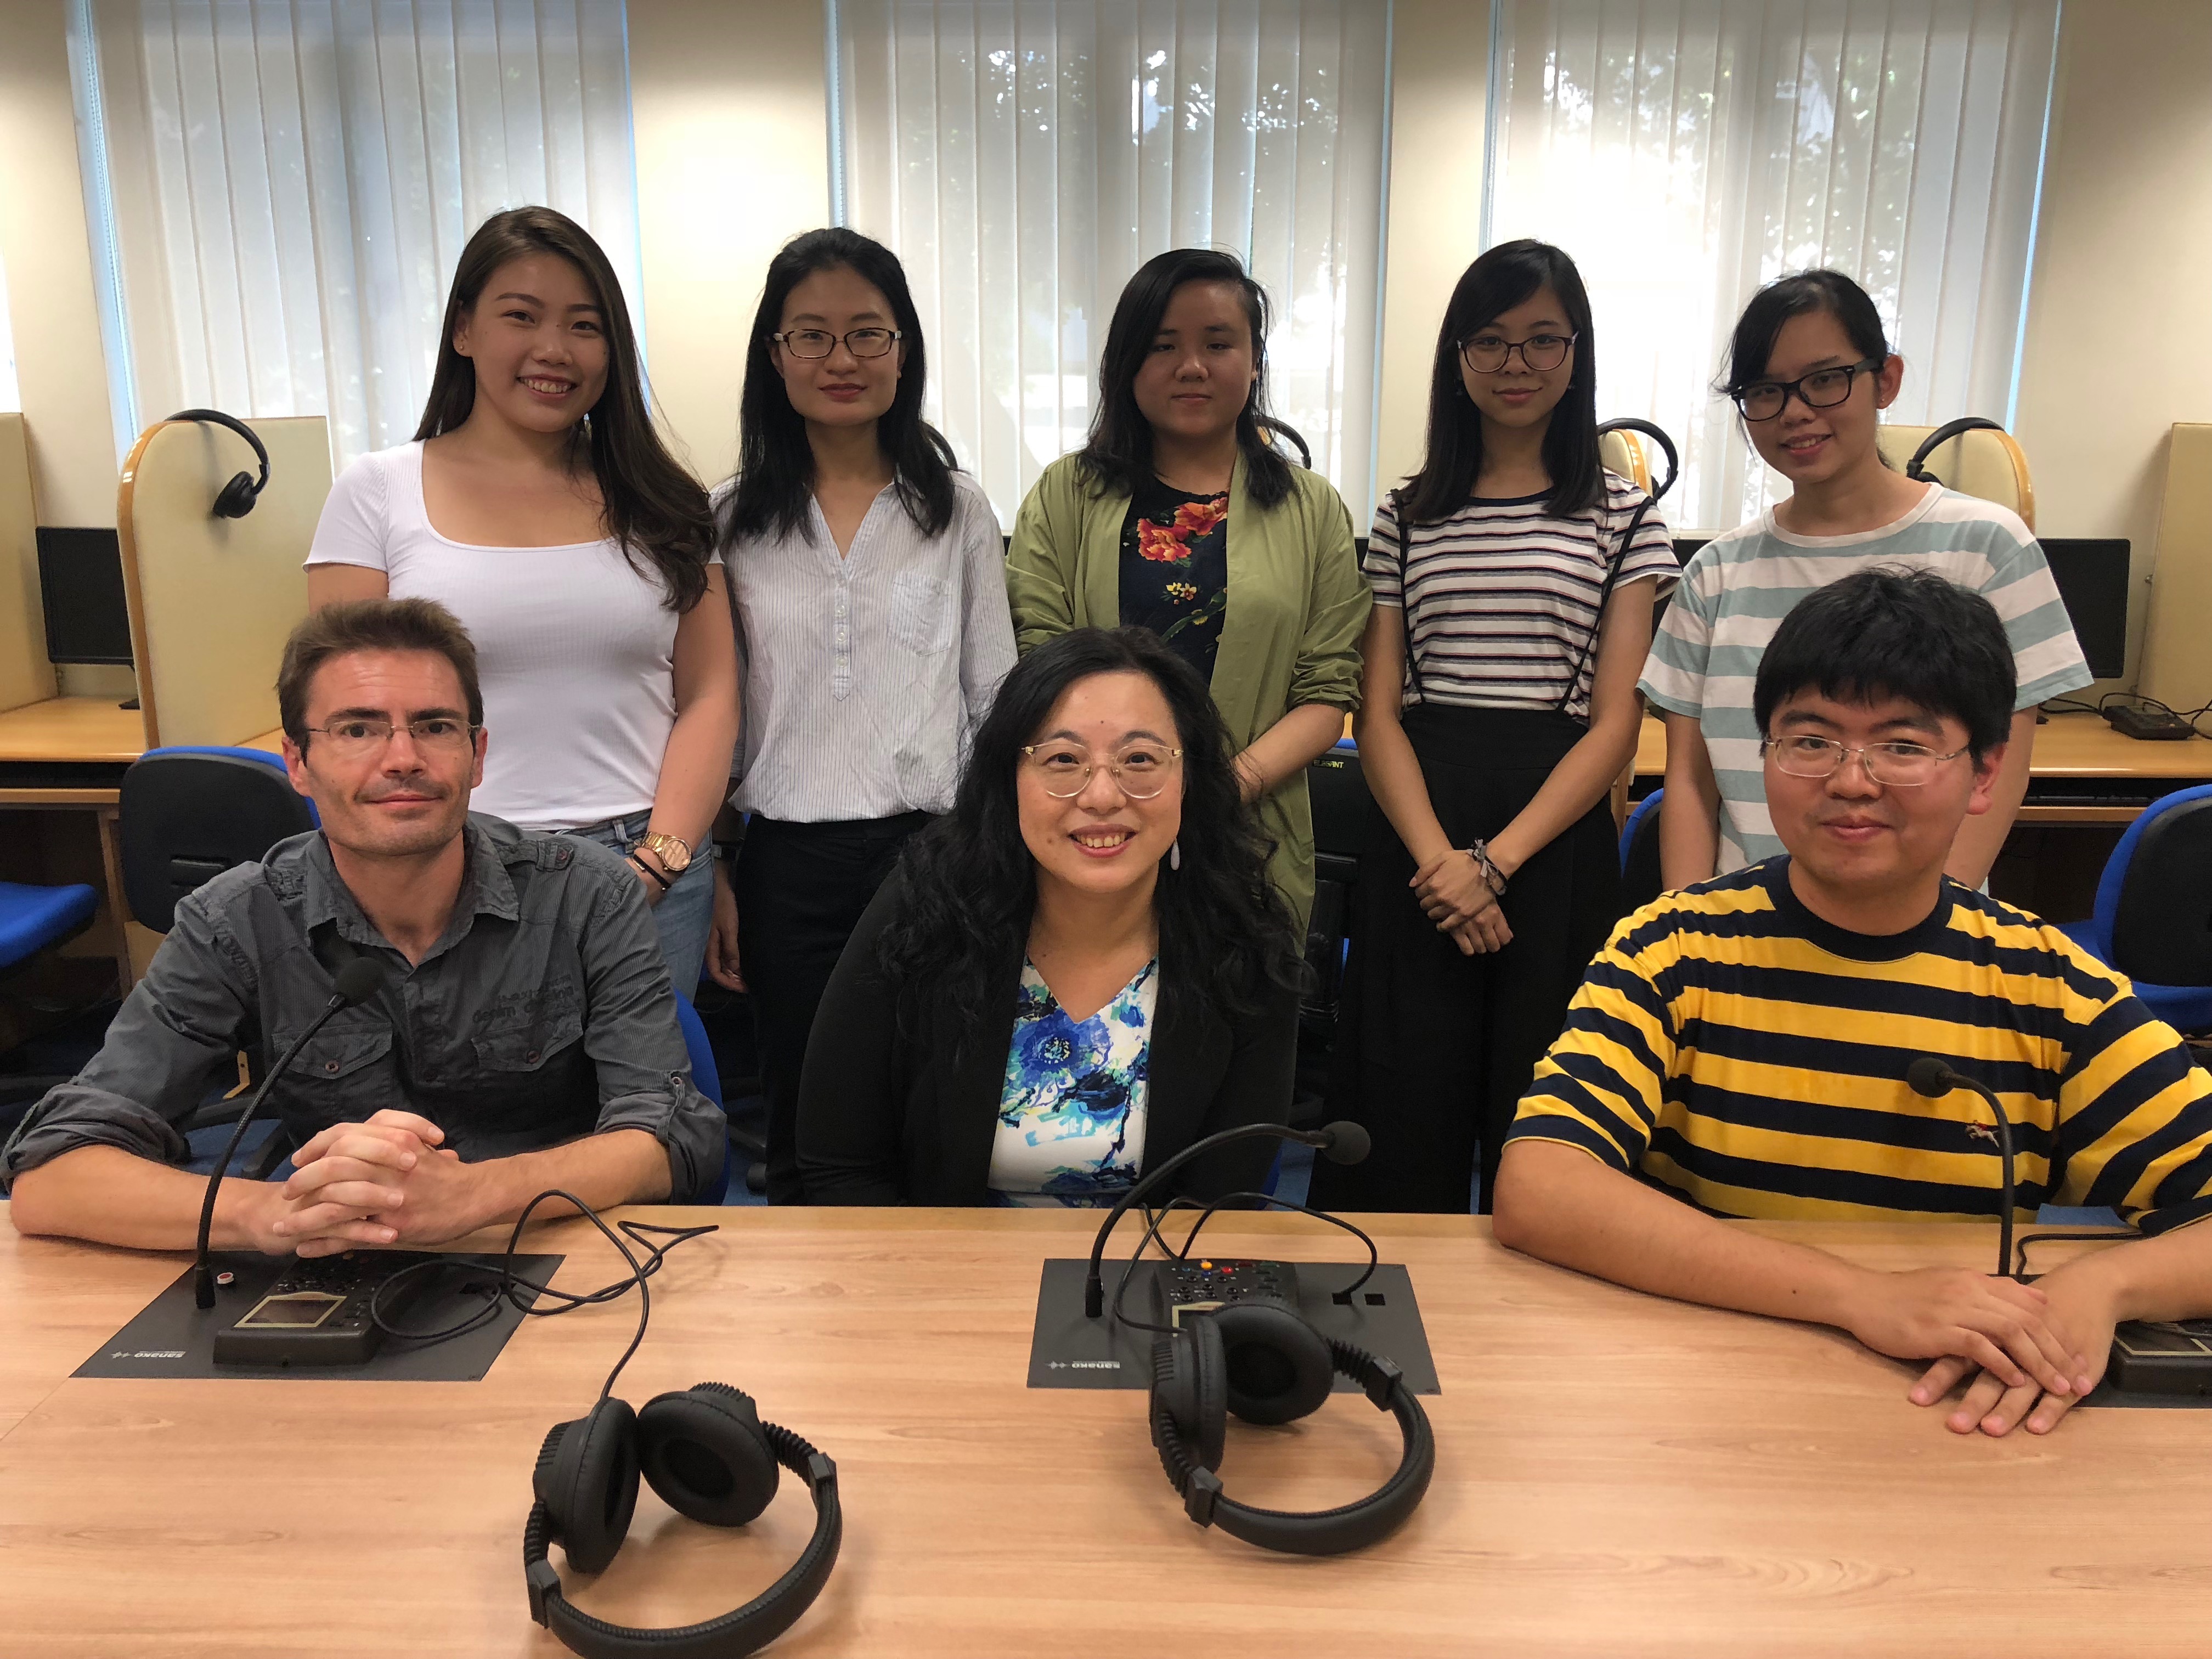 From left to right, front row: Fernando GABARRON BARRIOS, Dr. Jun PAN & William PAN
From left to right, back row: Janny WONG, Alice YANG, Rigel PAK, Tammy TANG & Gladys SHIU
